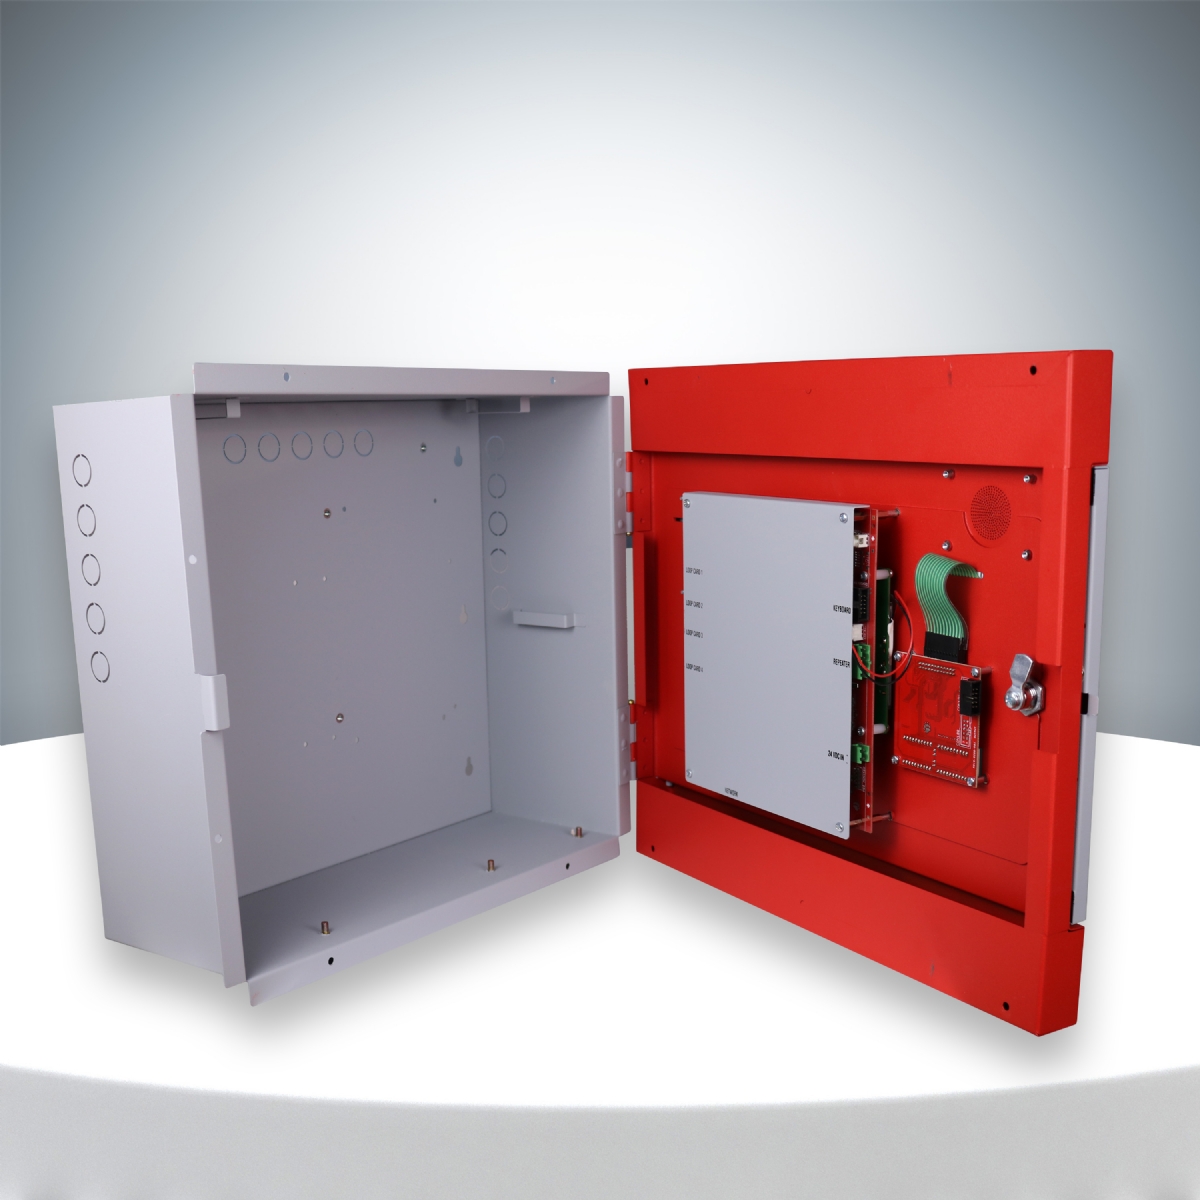 I-1000-4 4 Loop Addressable Surface Mounted Fire Alarm Panel